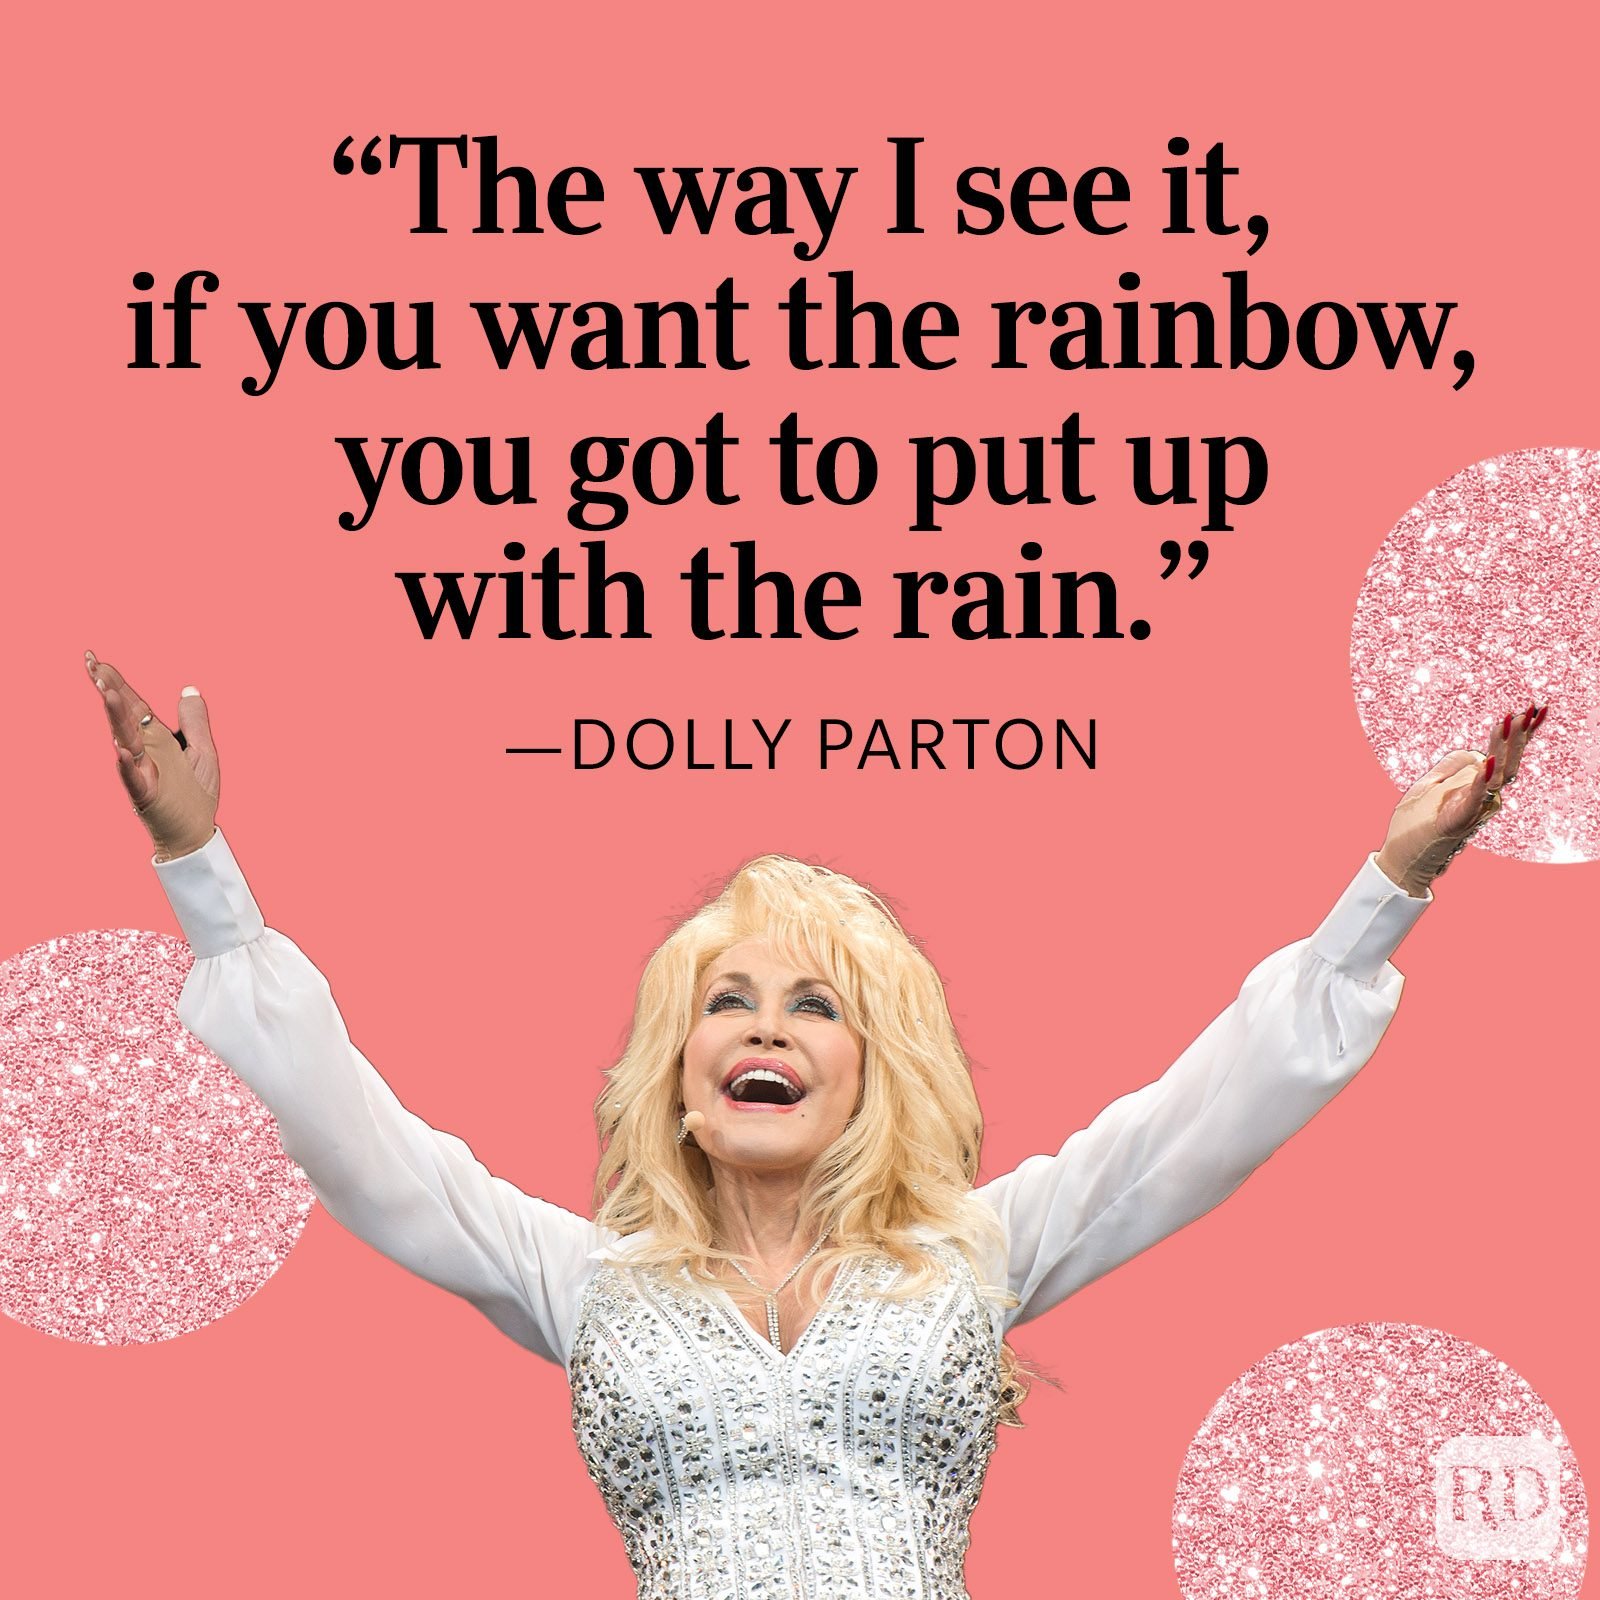 Dolly Parton Quotes: Her Funniest and Most Inspiring Sayings